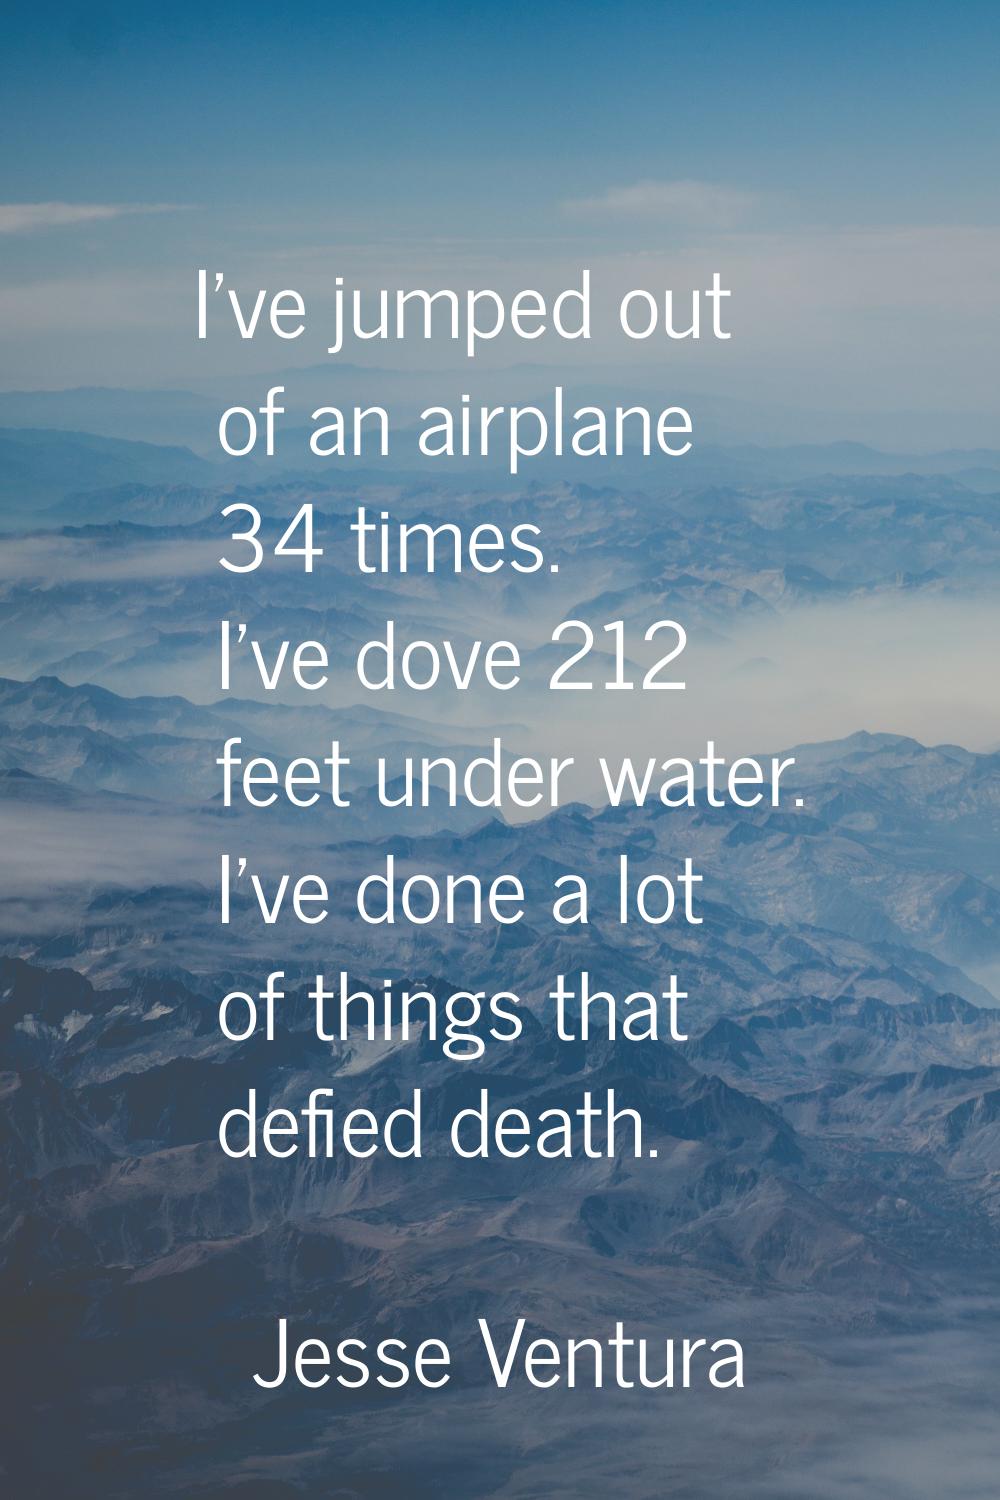 I've jumped out of an airplane 34 times. I've dove 212 feet under water. I've done a lot of things 